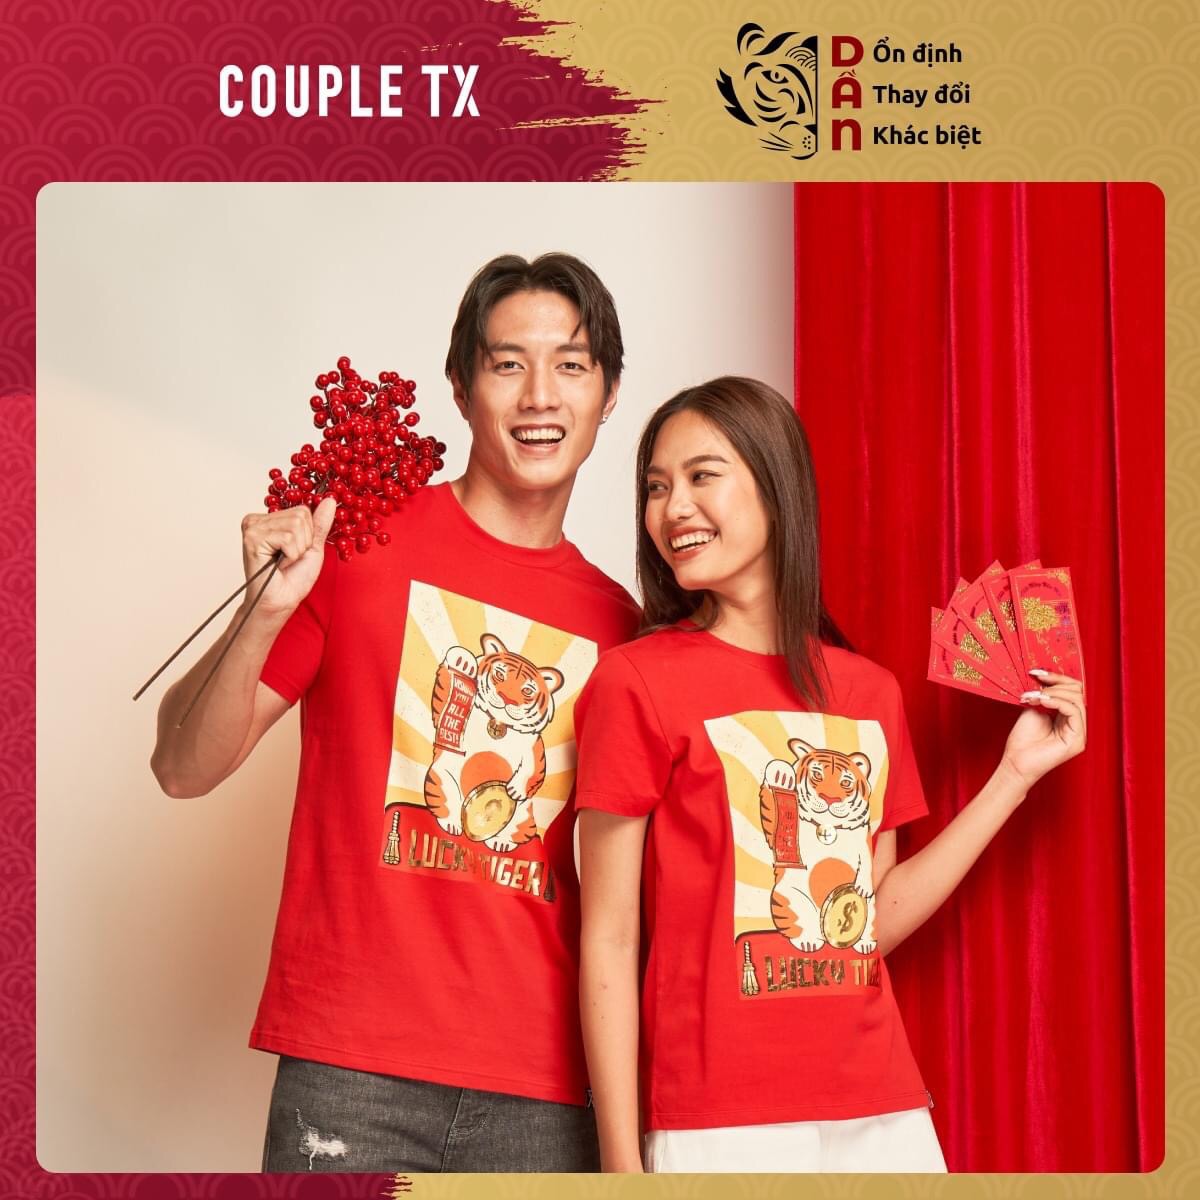 COUPLE TX – NEW YEARS IN STYLISH WITH COUPLE TX